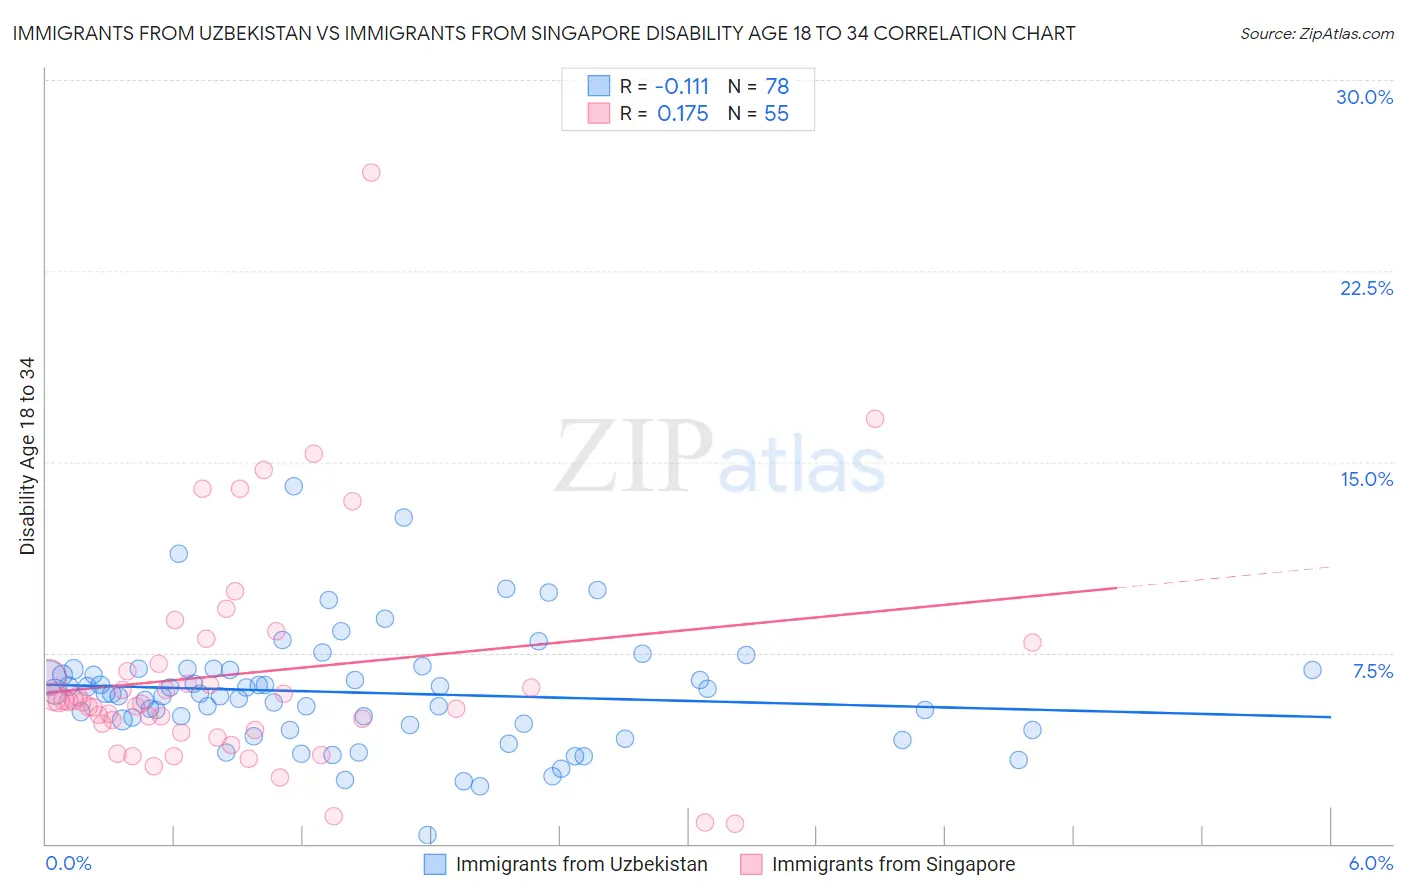 Immigrants from Uzbekistan vs Immigrants from Singapore Disability Age 18 to 34